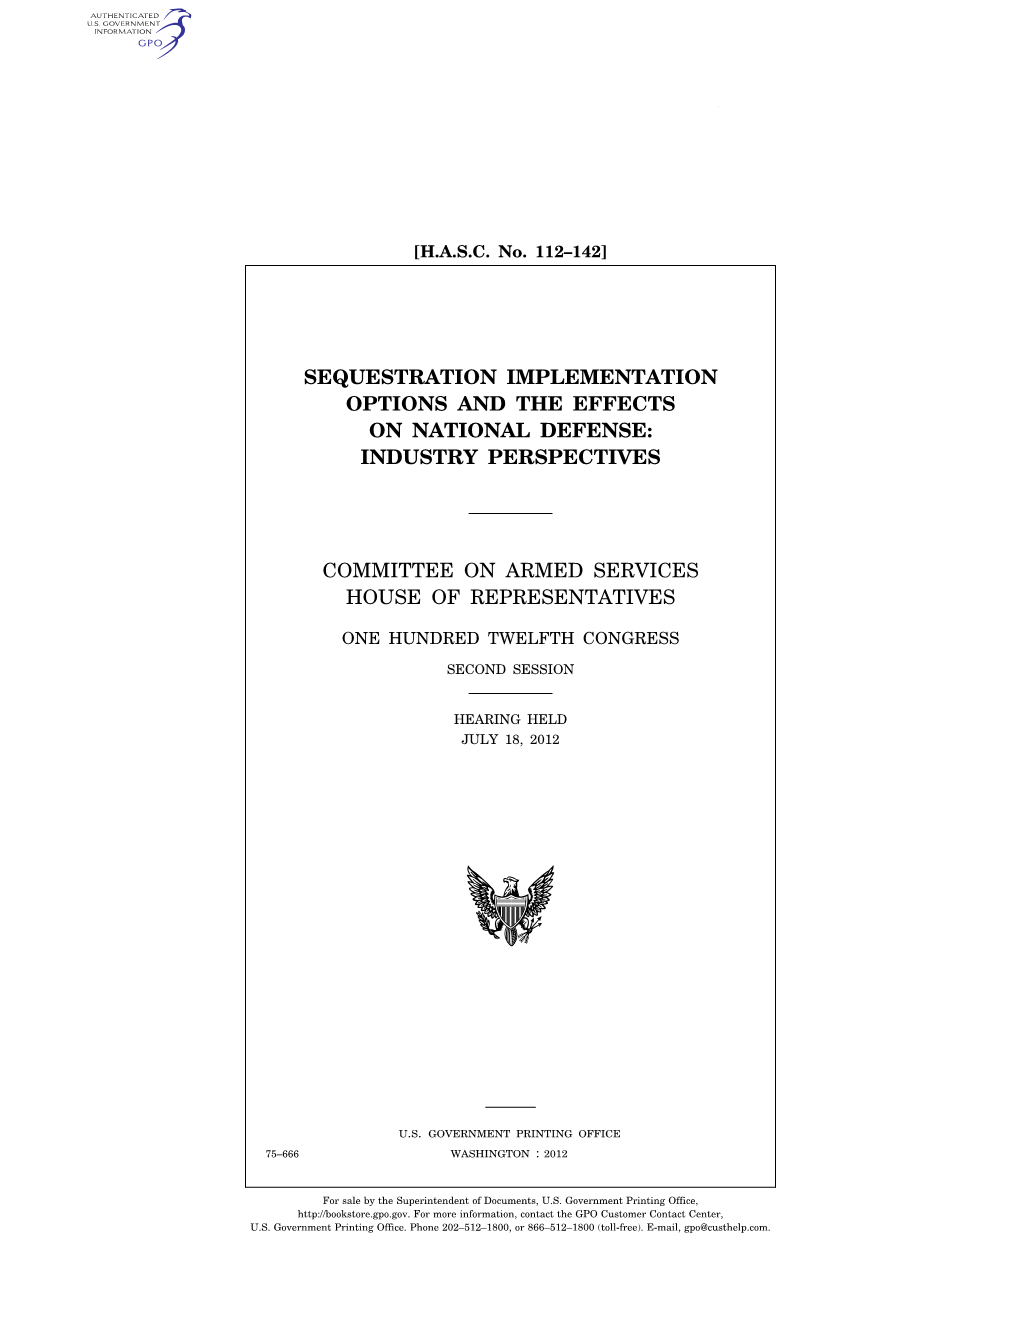 Sequestration Implementation Options and the Effects on National Defense: Industry Perspectives